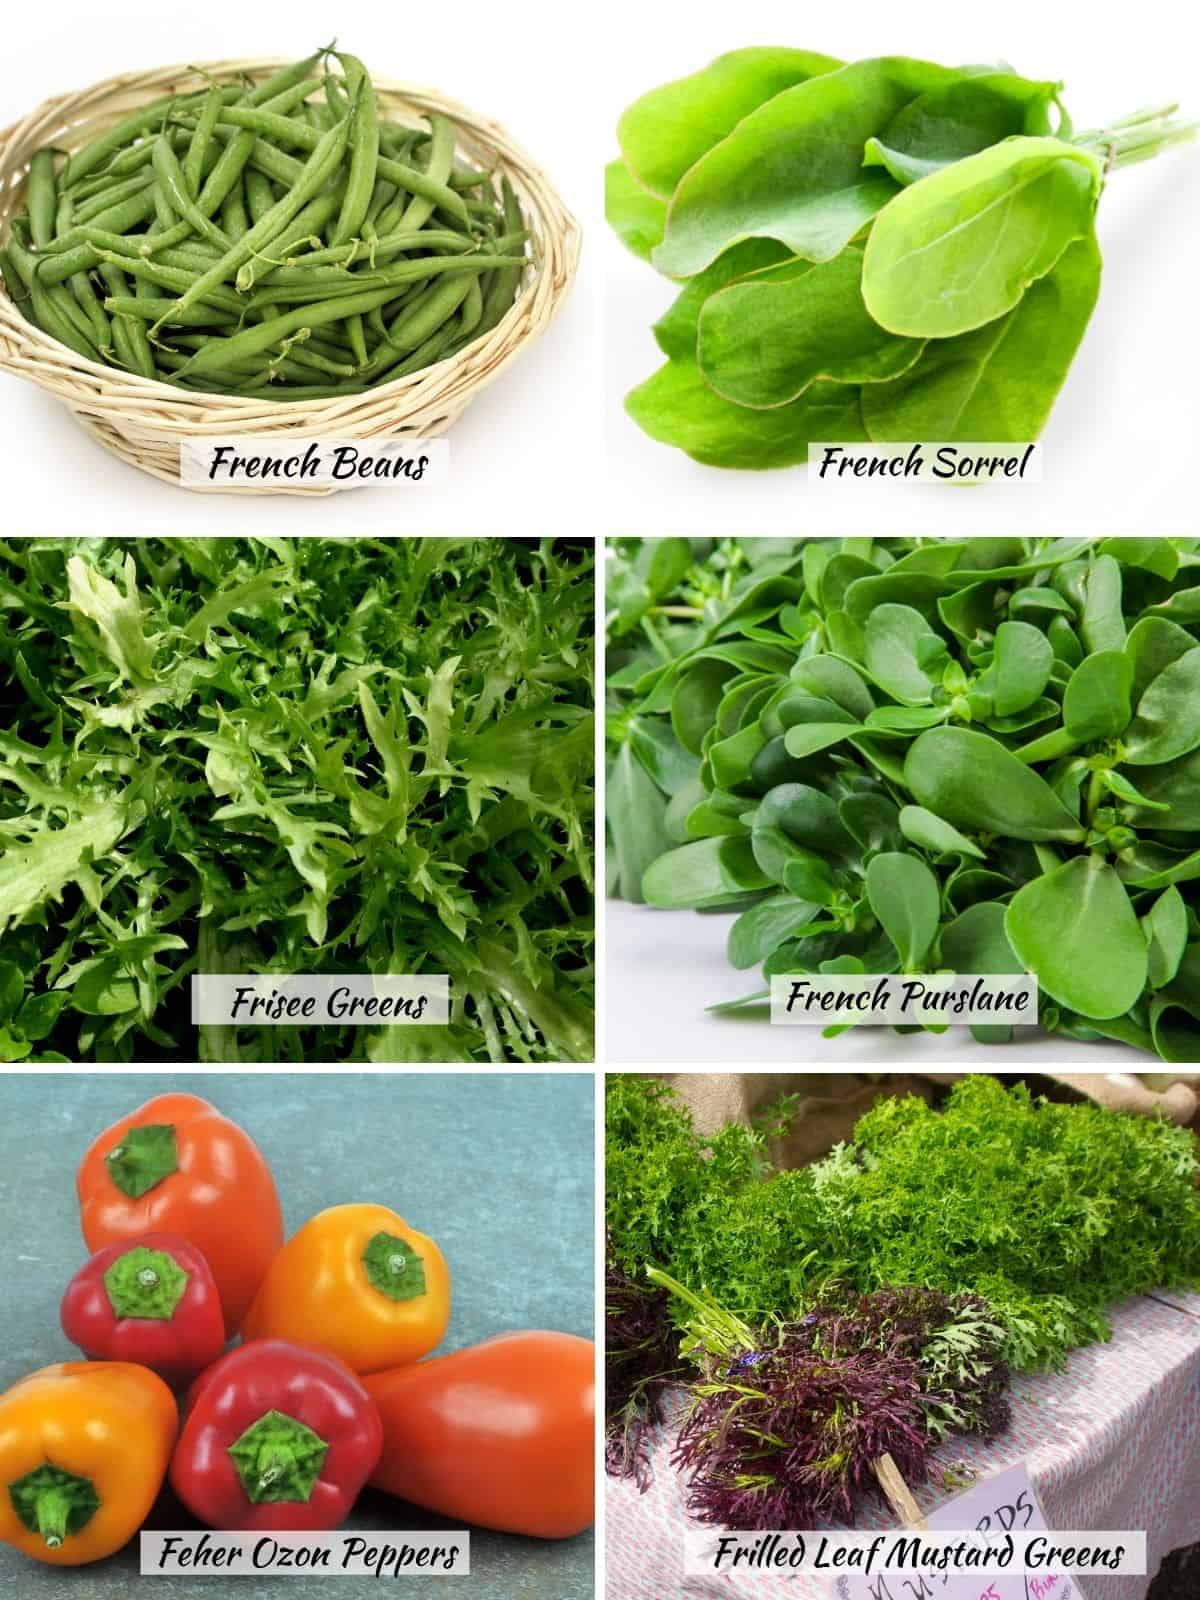 French beans, french sorrel, frisee greens, french purslane, feher ozon peppers, frilled leaf mustard greens. 